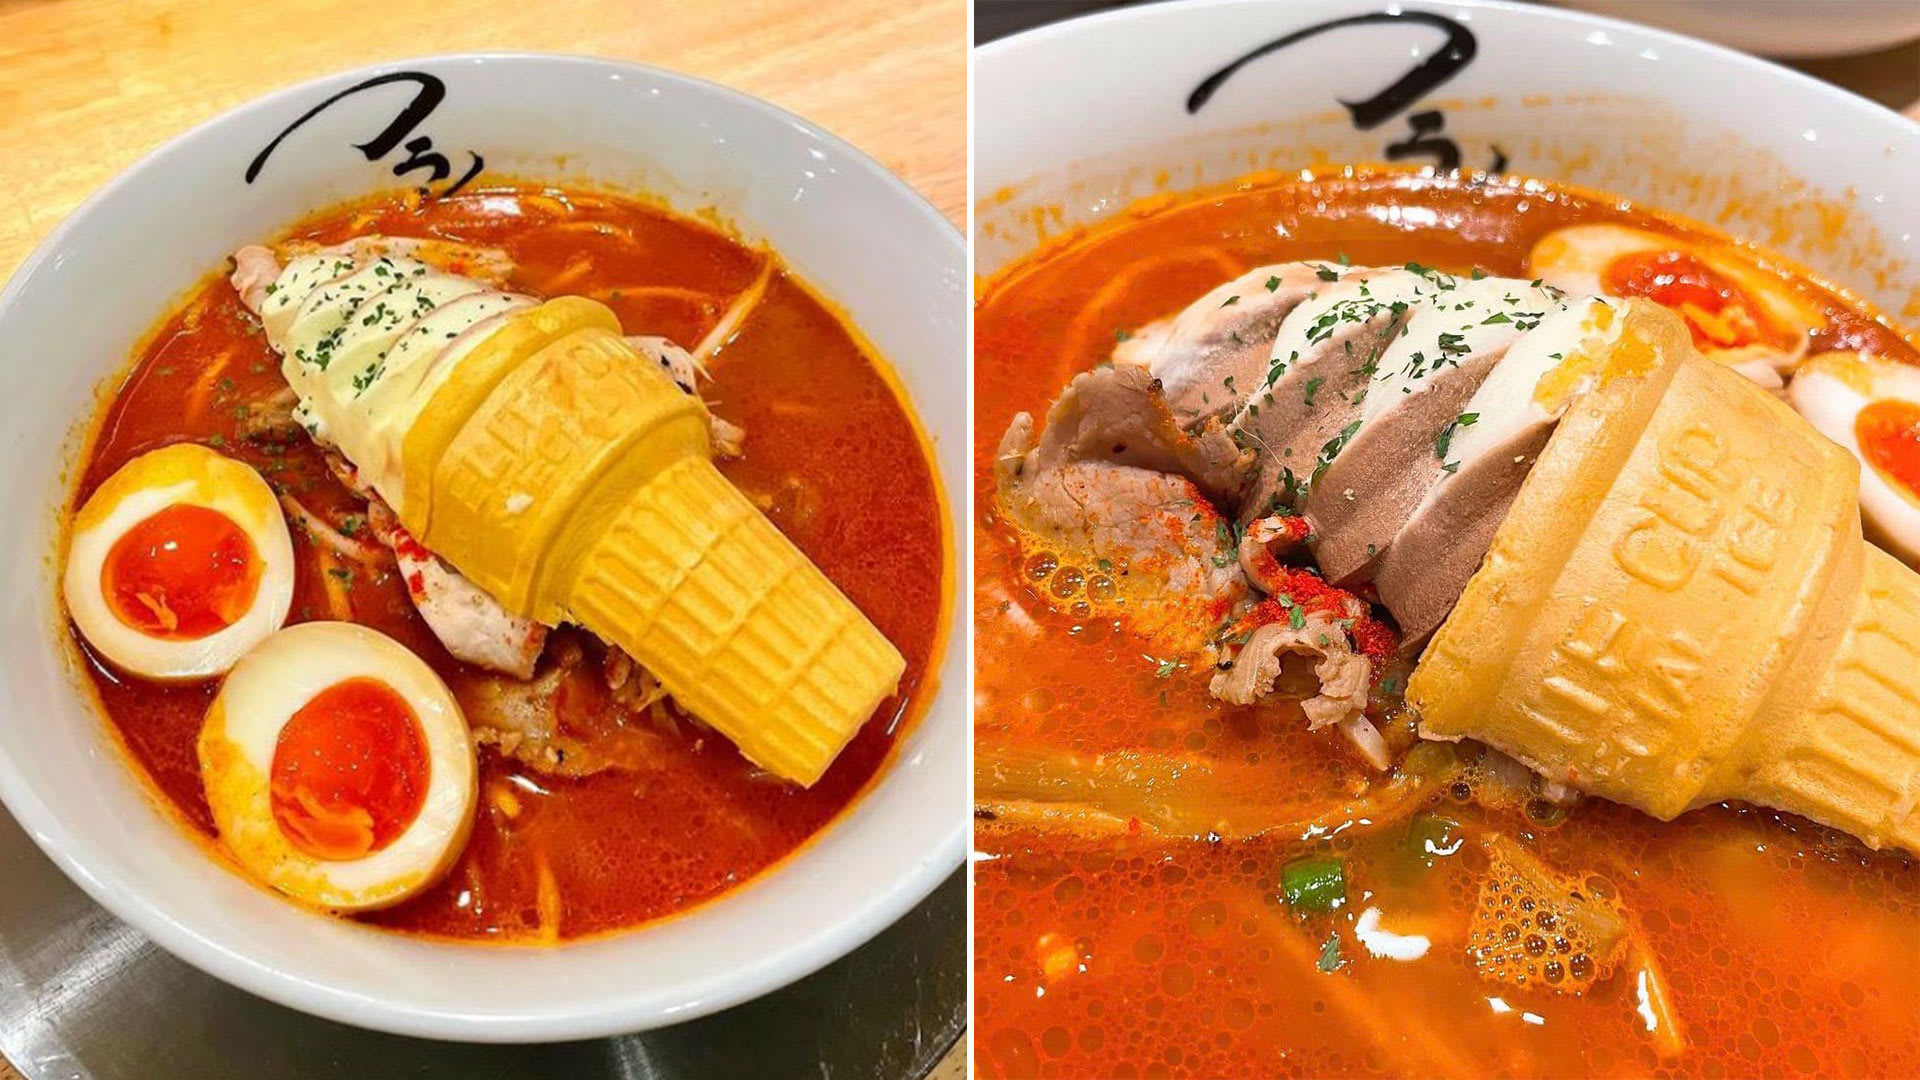 Japanese Restaurant Offers Spicy Ramen With A Whole Soft Serve Cone